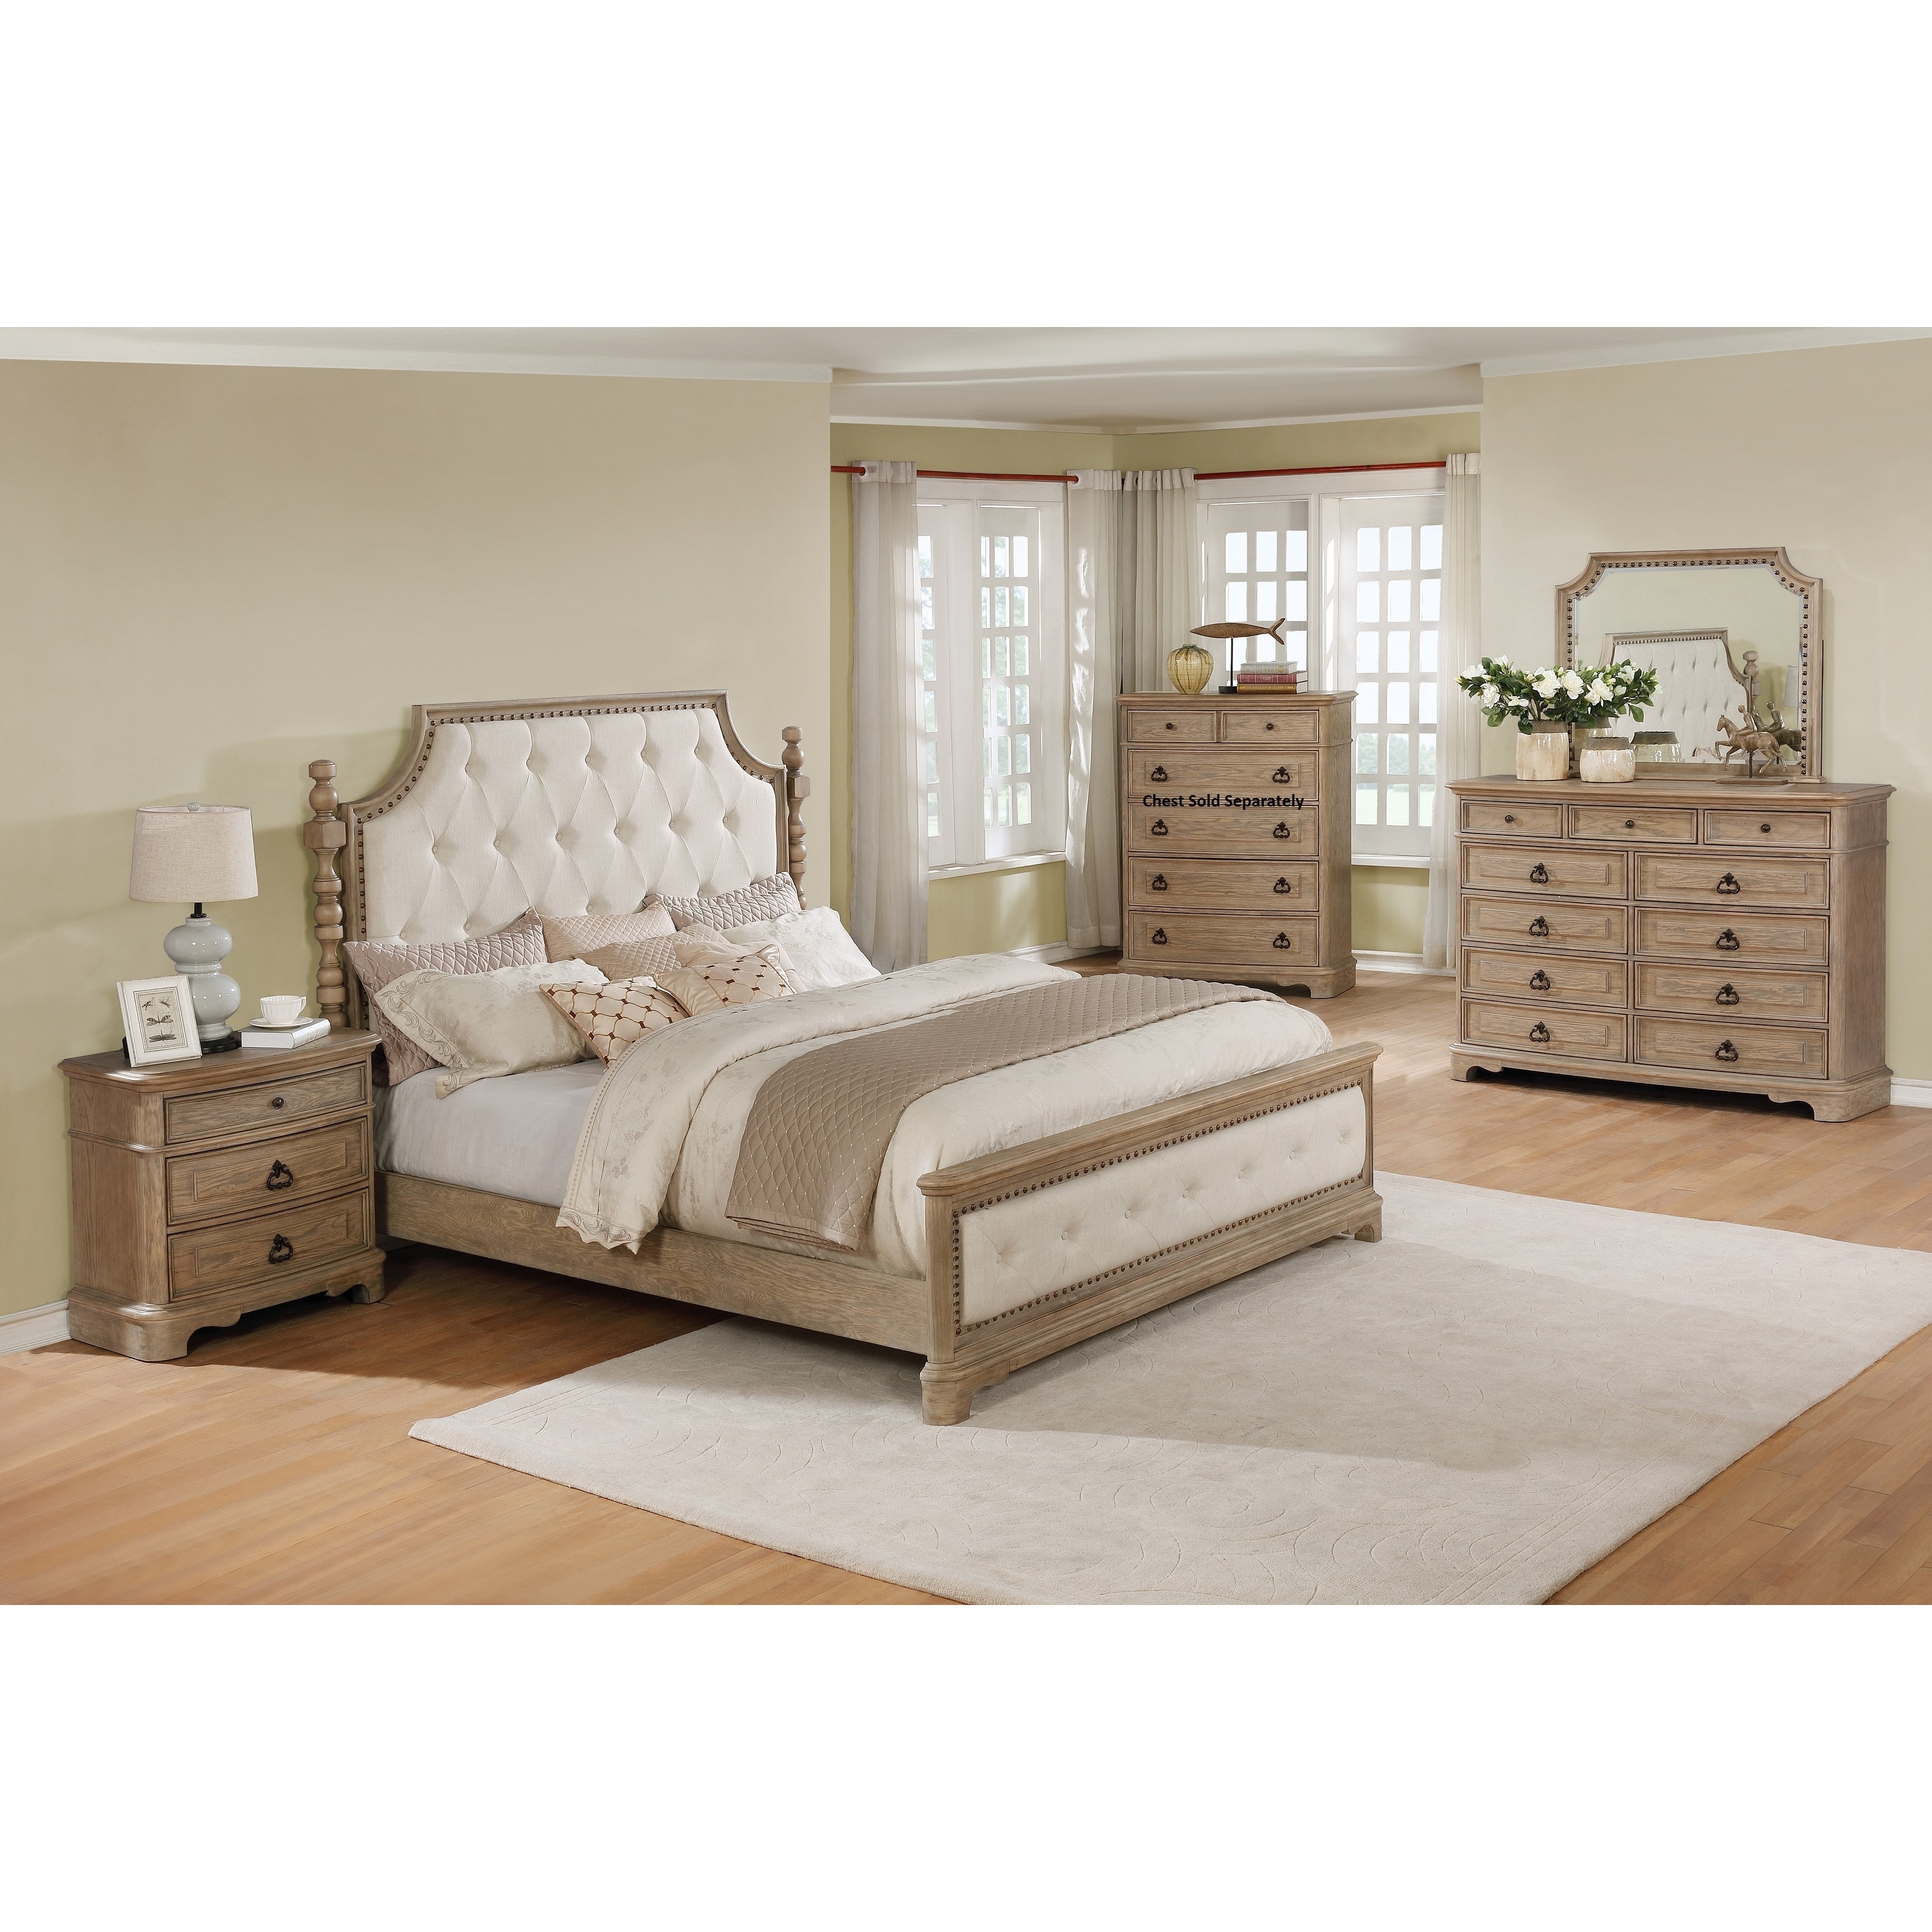 Piraeus 296 Solid Wood Construction Bedroom Set With King Size Bed Dresser Mirror And Night Stand